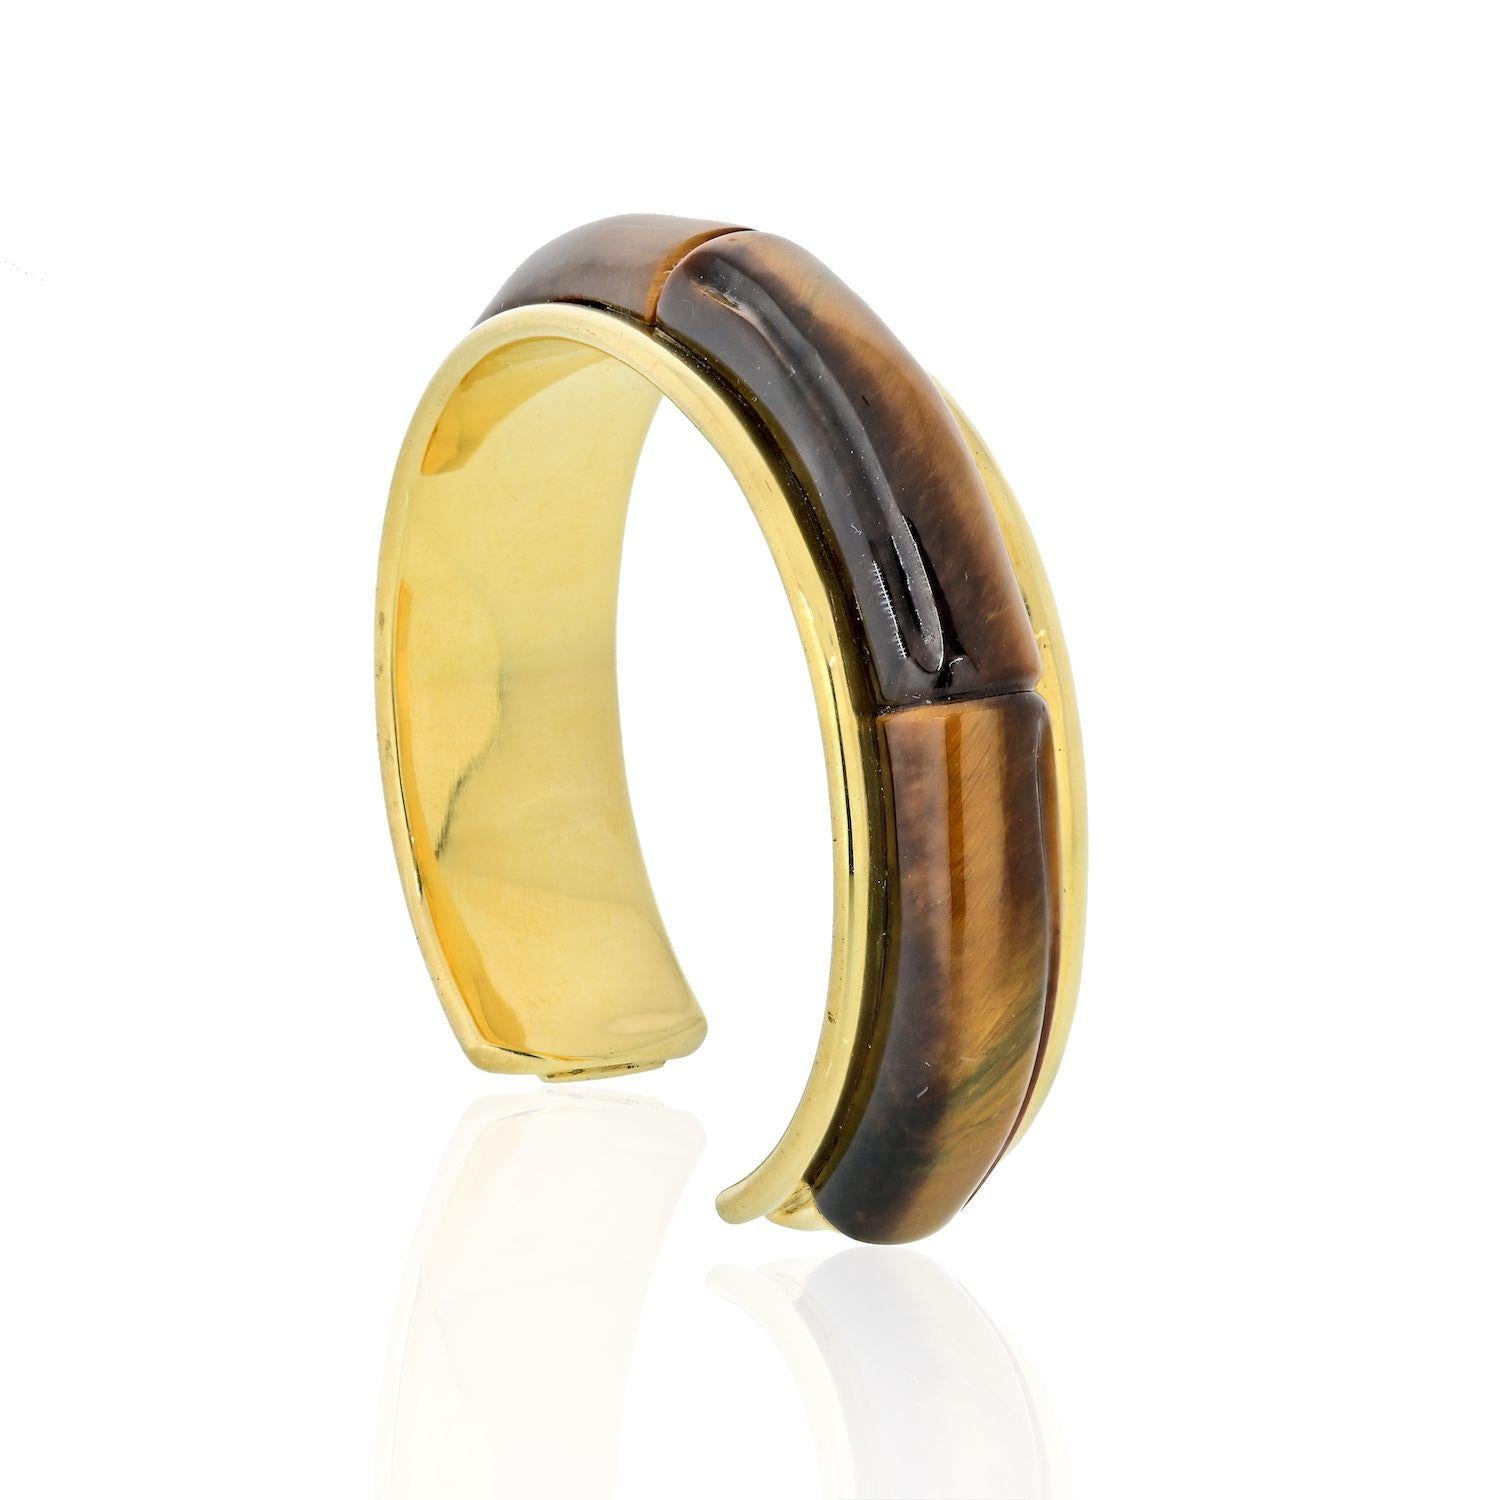 Tiffany & Co 18K yellow gold cuff bracelet set with four tiger's-eye panels. 
SIZE/DIMENSIONS: 15.5 cm (continuous inner circumference), 1.5 cm width
GROSS WEIGHT: 65.0 grams
METAL: 18k yellow gold
STONES: 4 carved tiger's-eye quartz